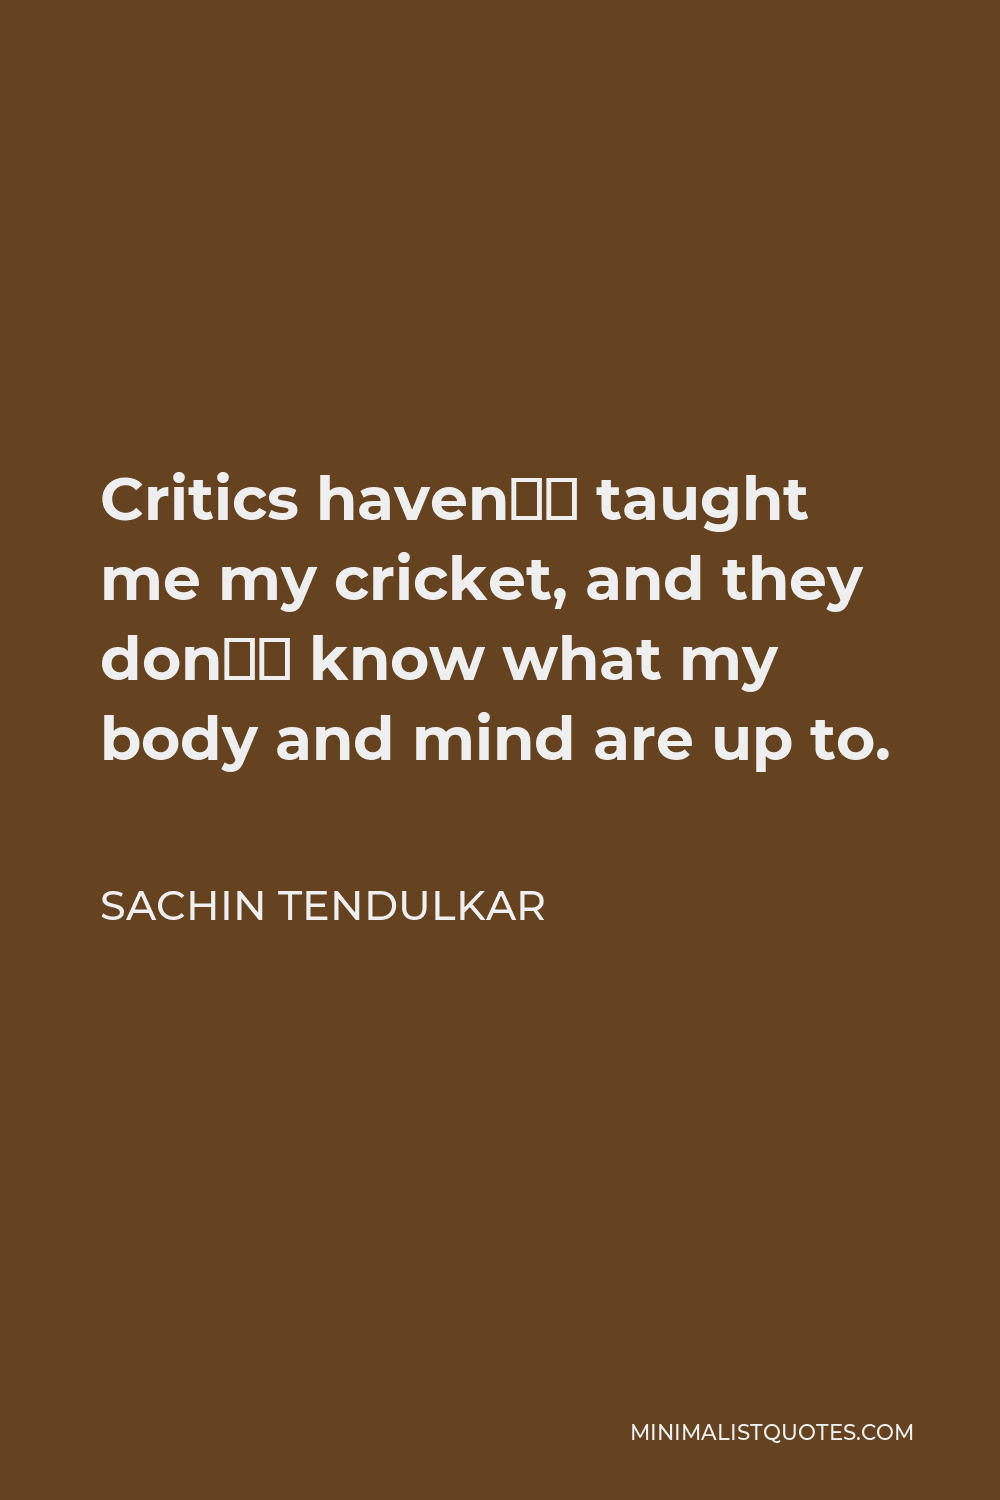 Sachin Tendulkar Quote - Critics haven’t taught me my cricket, and they don’t know what my body and mind are up to.